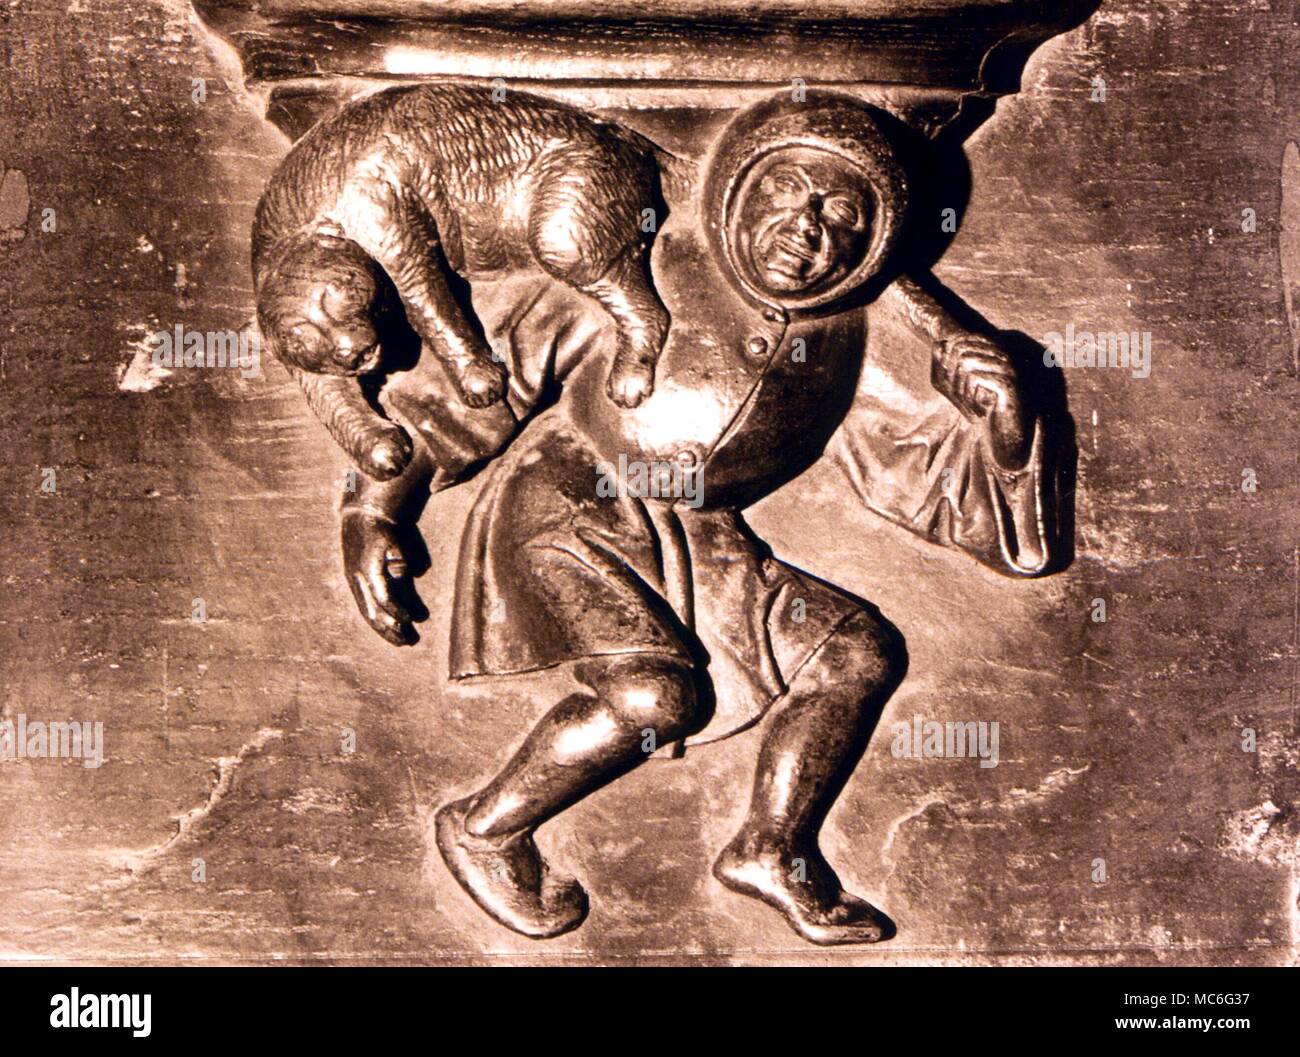 ANIMALS Image of a man throwing a cat - from a 15th century misericord in the stalls of St Sulpice church, Diest, Belgium Stock Photo